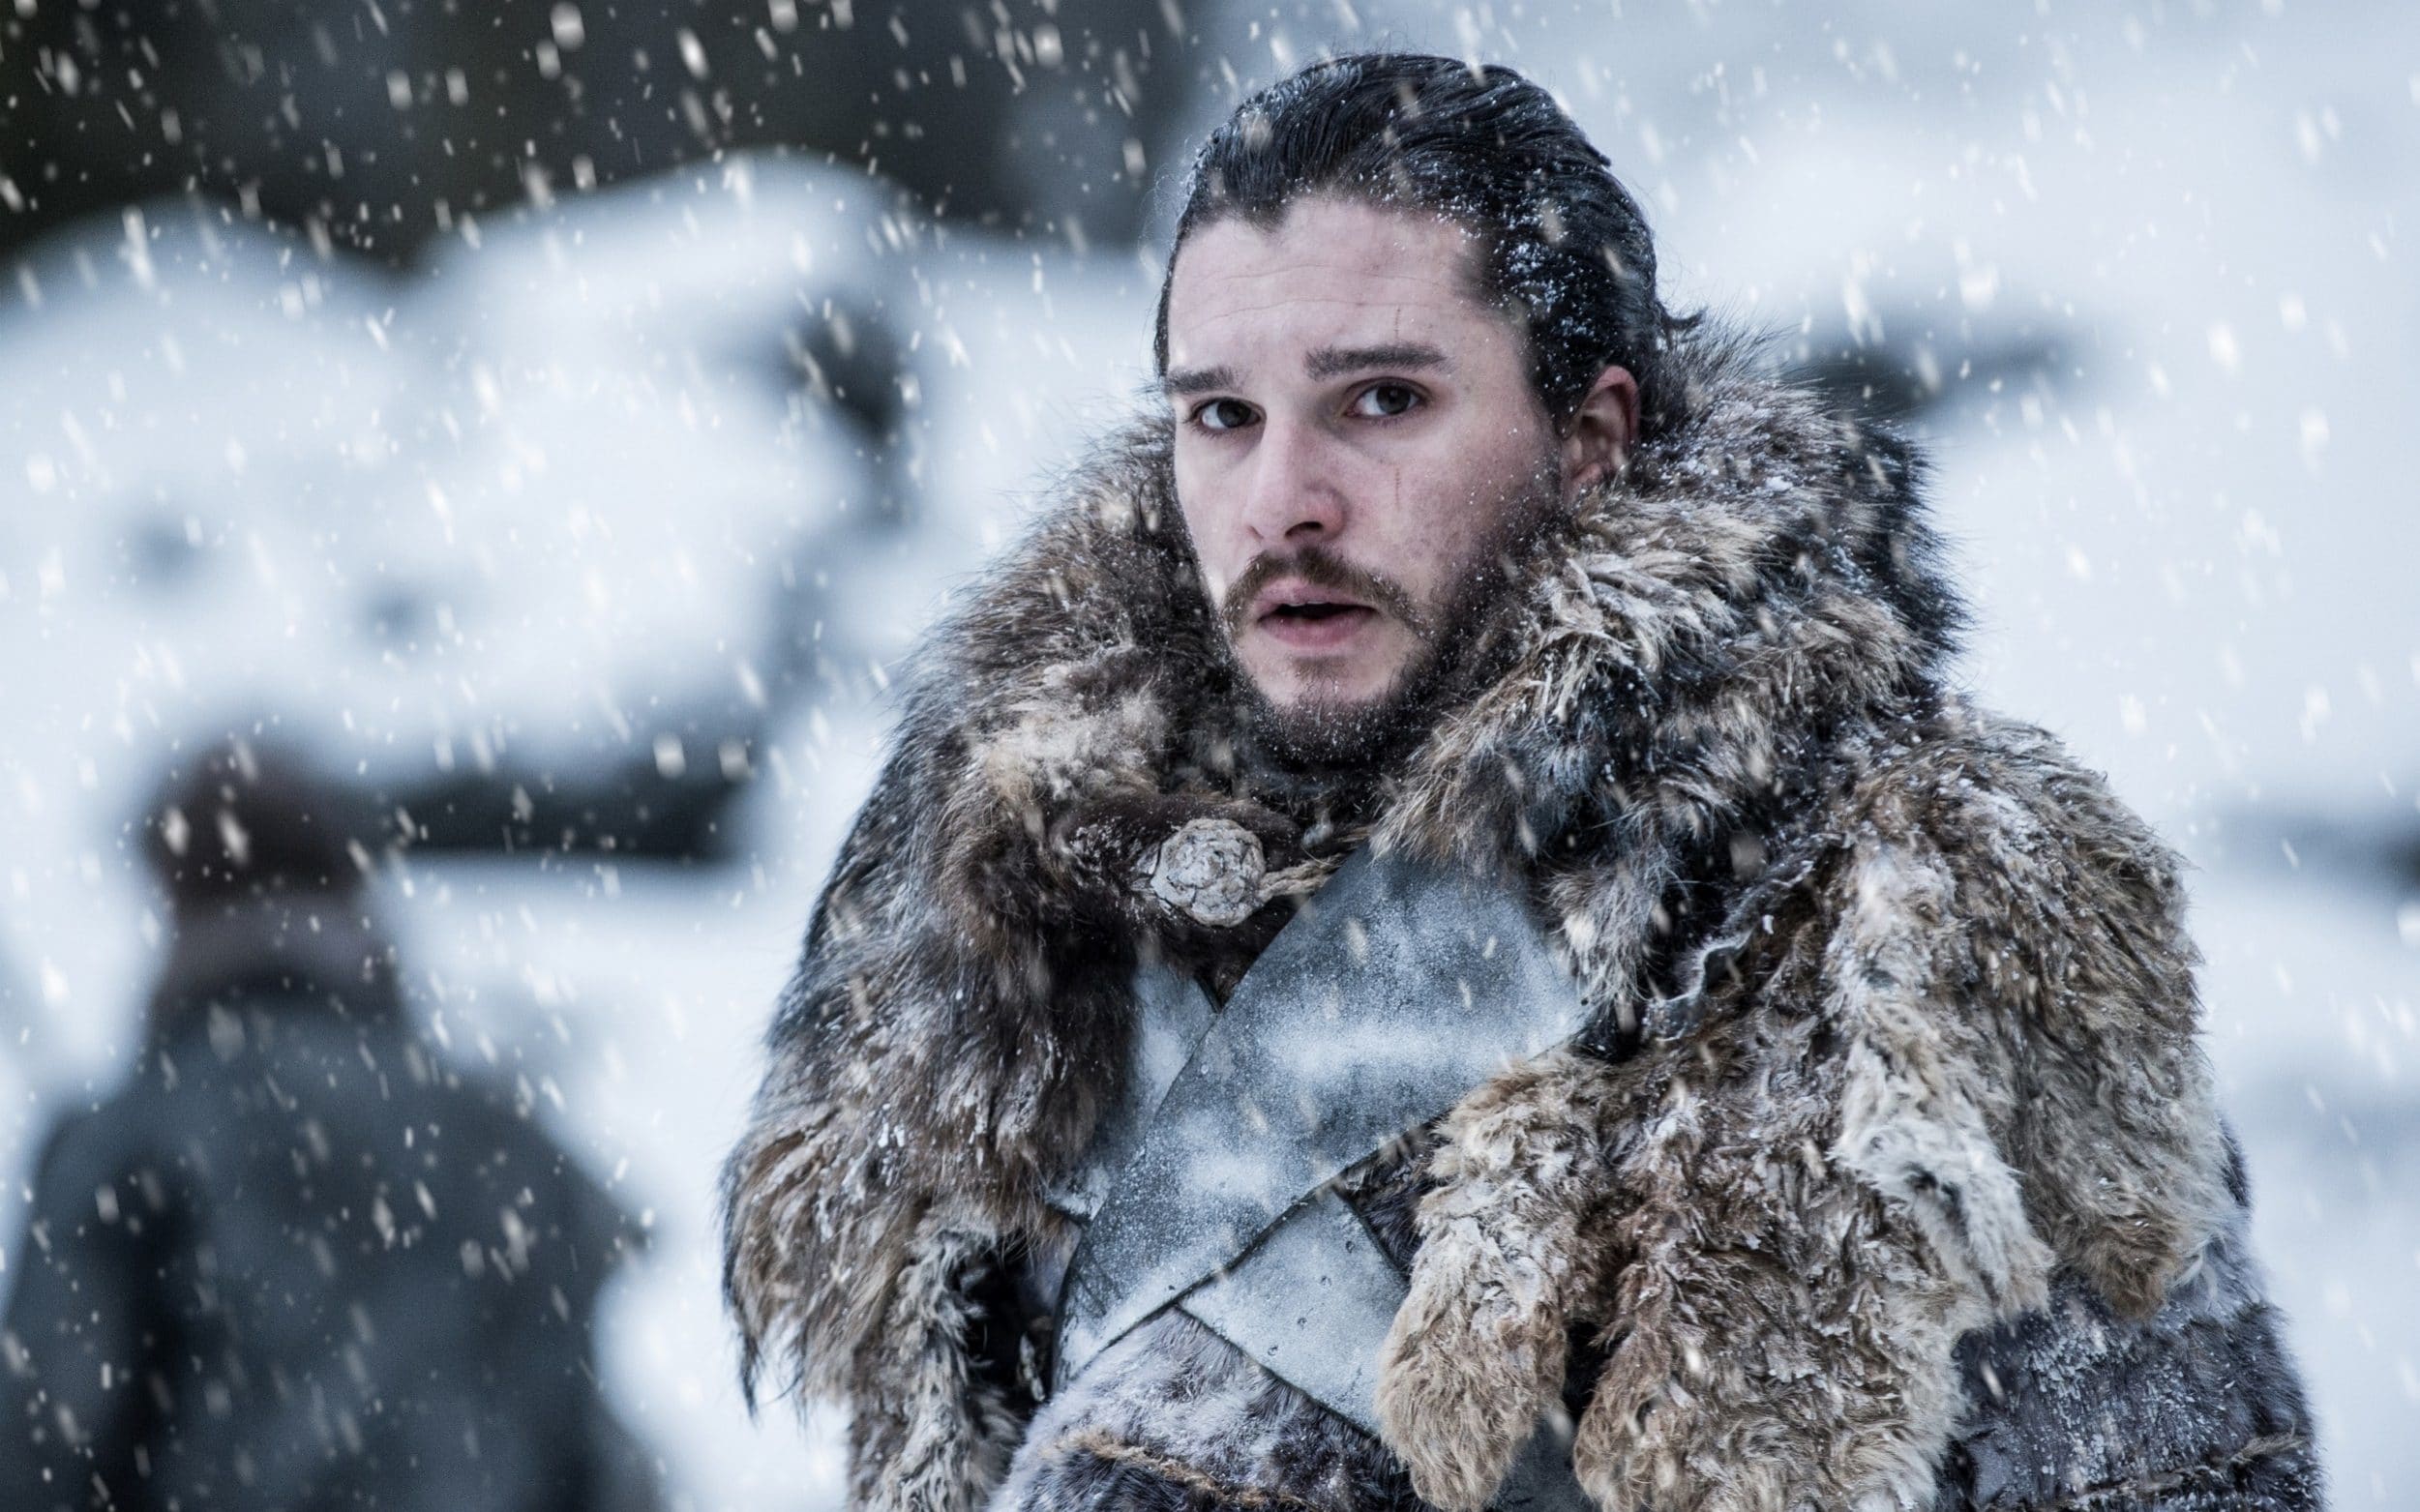 Everything you need to know about Game of Thrones' season 8 premiere